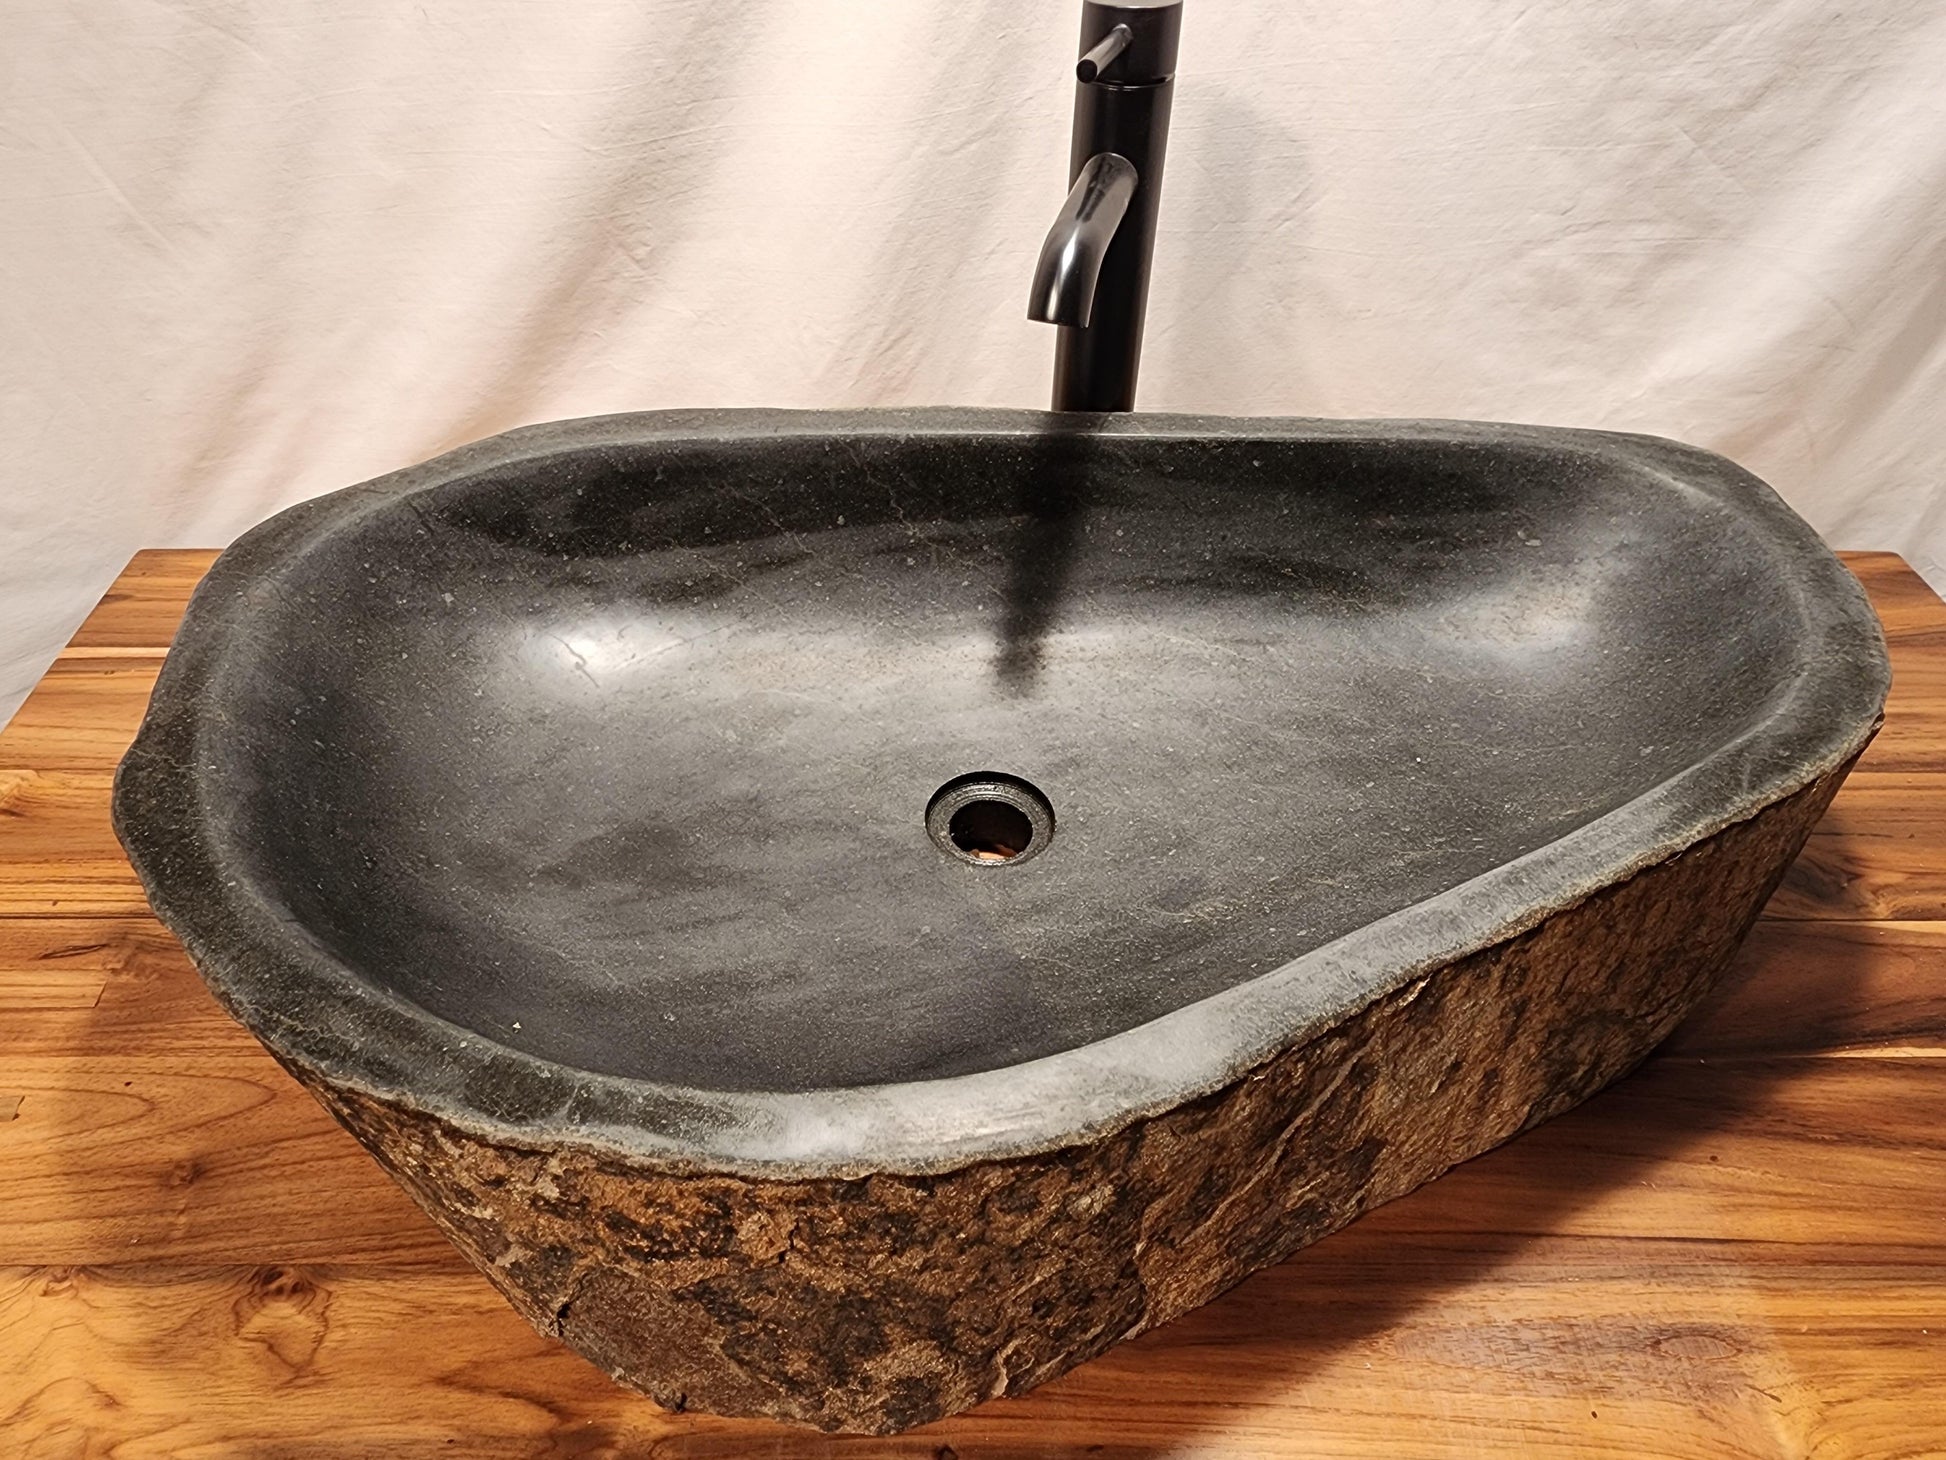 Andesite Natural Stone Vessel Sink Extra Long, ANDXL4 - Impact Imports